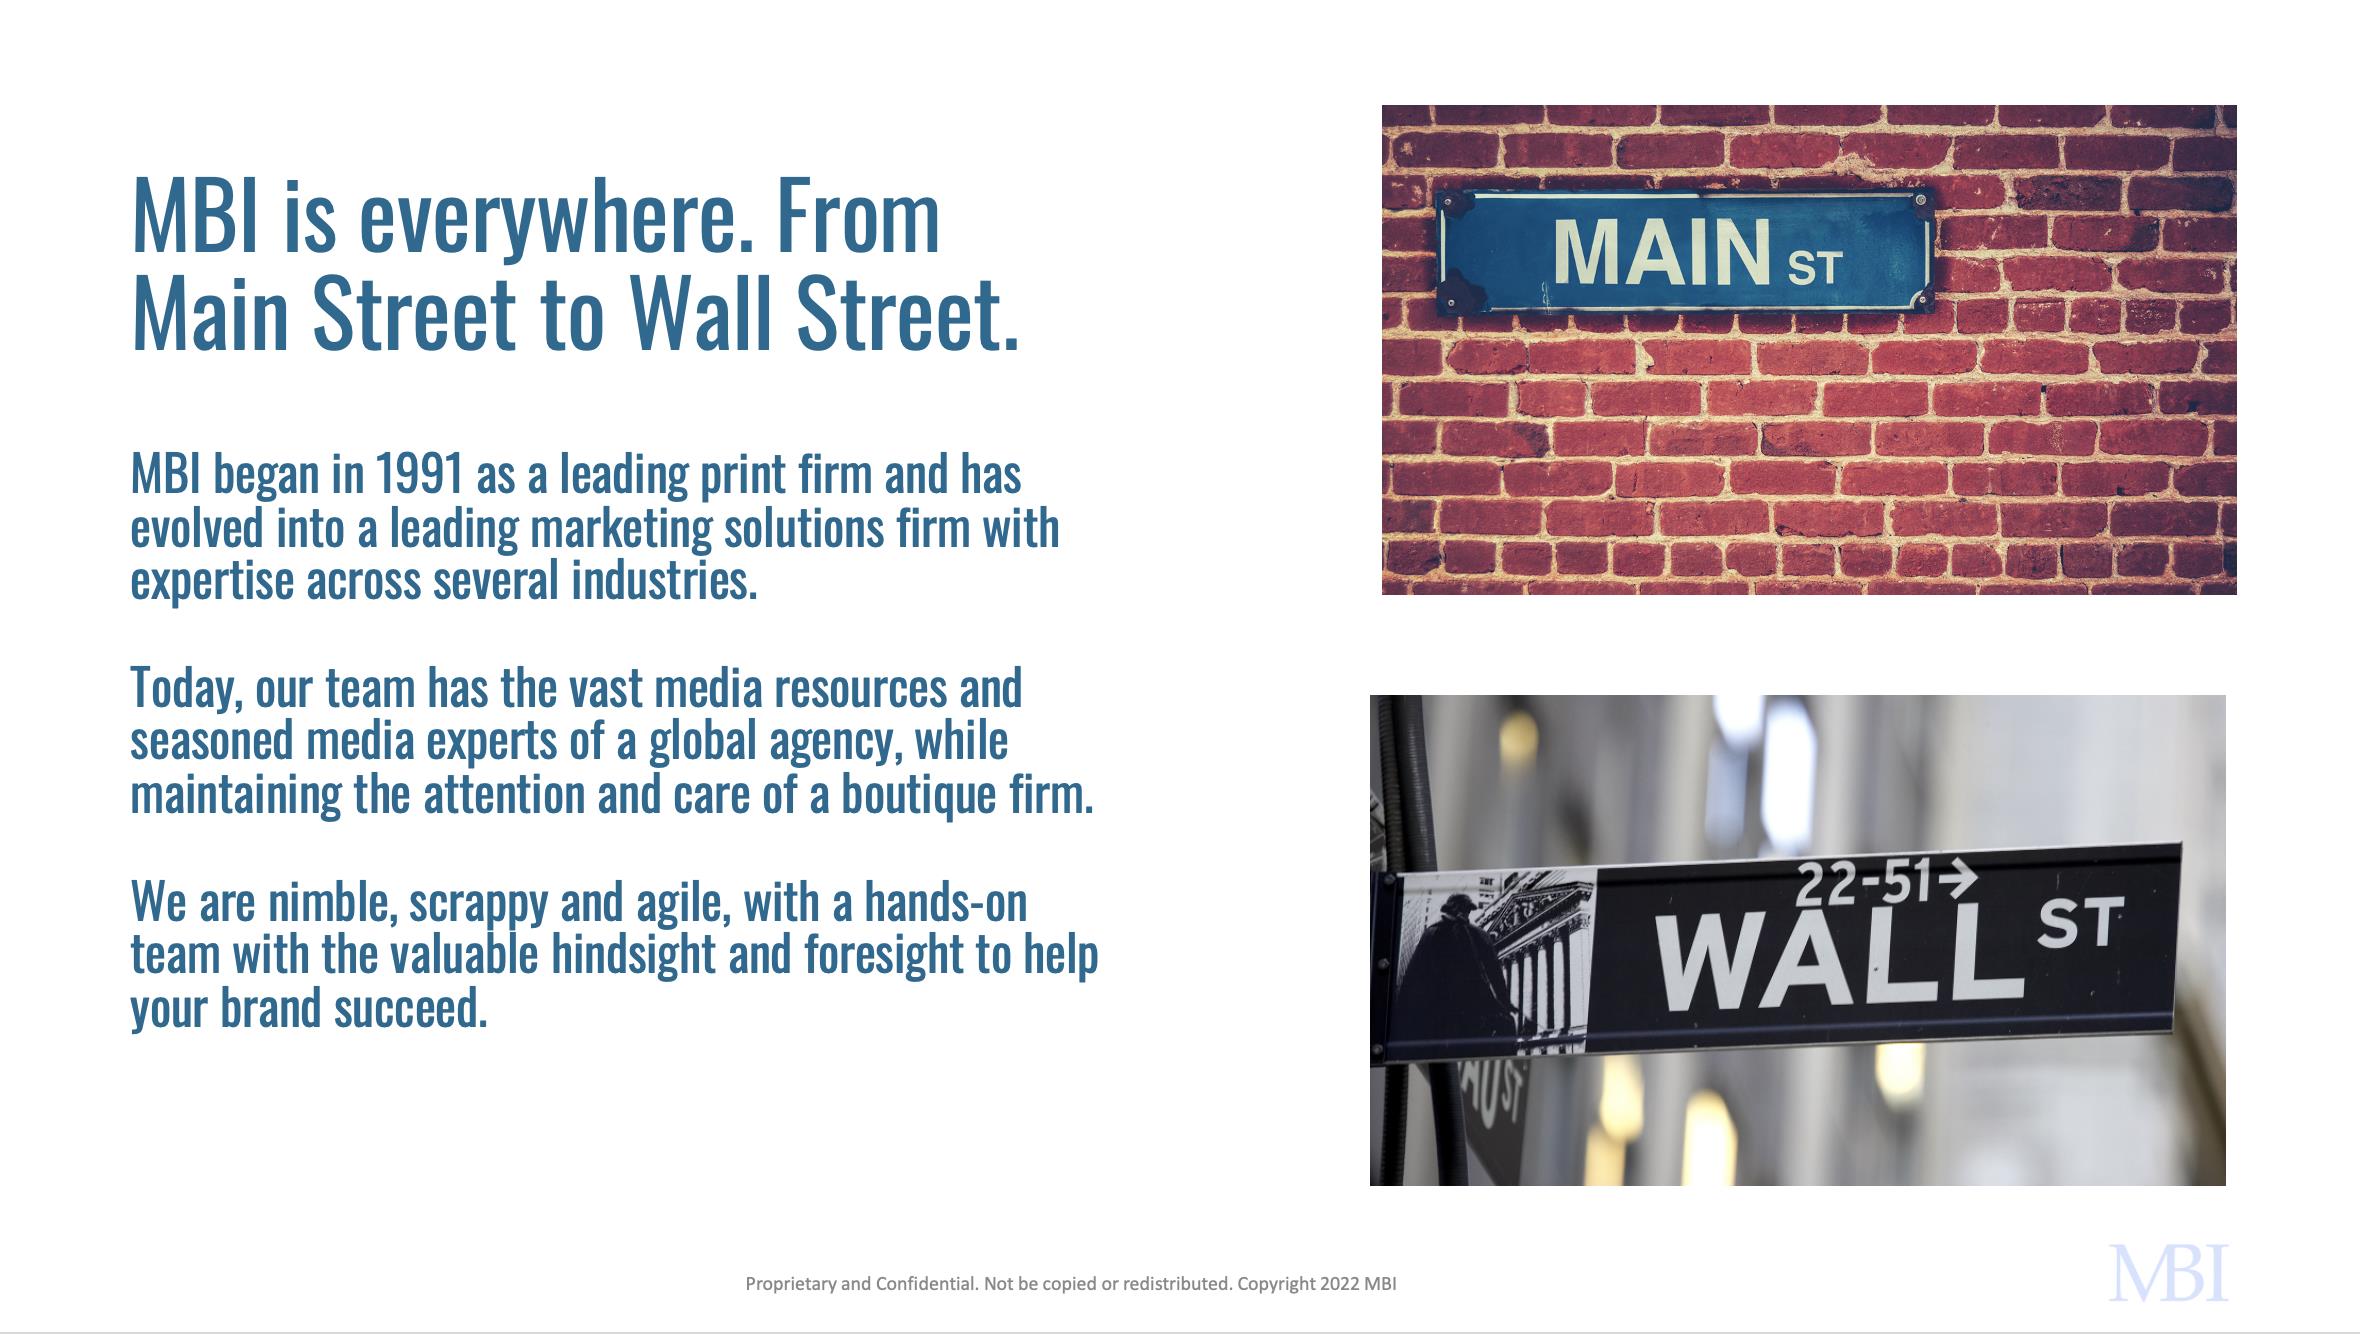 MBI is everywhere. From Main Street to Wall Street